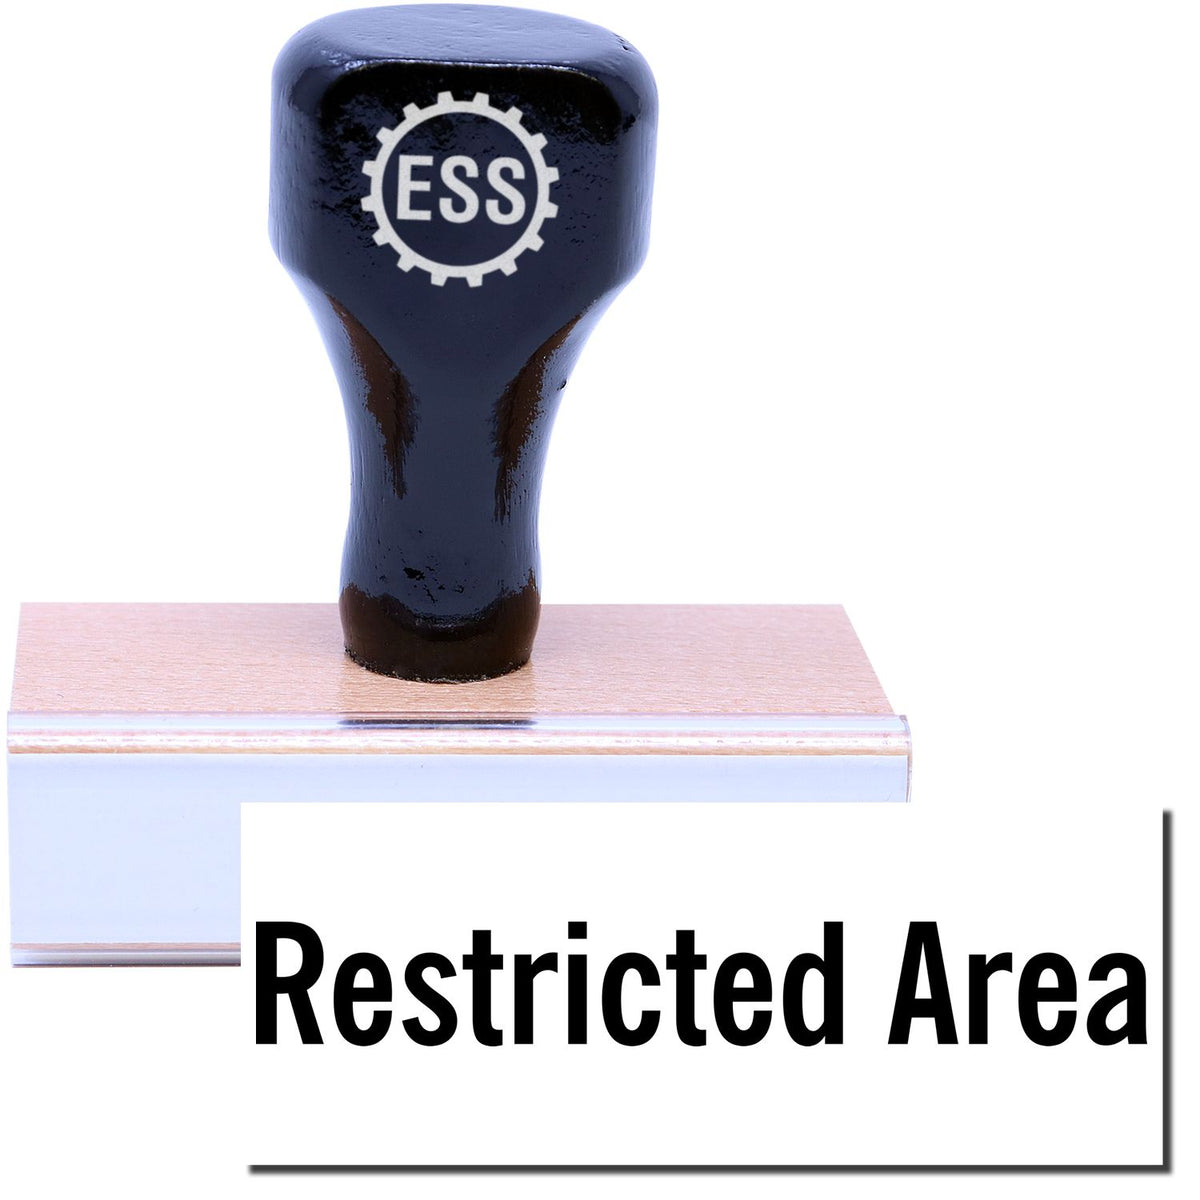 A stock office rubber stamp with a stamped image showing how the text &quot;Restricted Area&quot; in a large font is displayed after stamping.